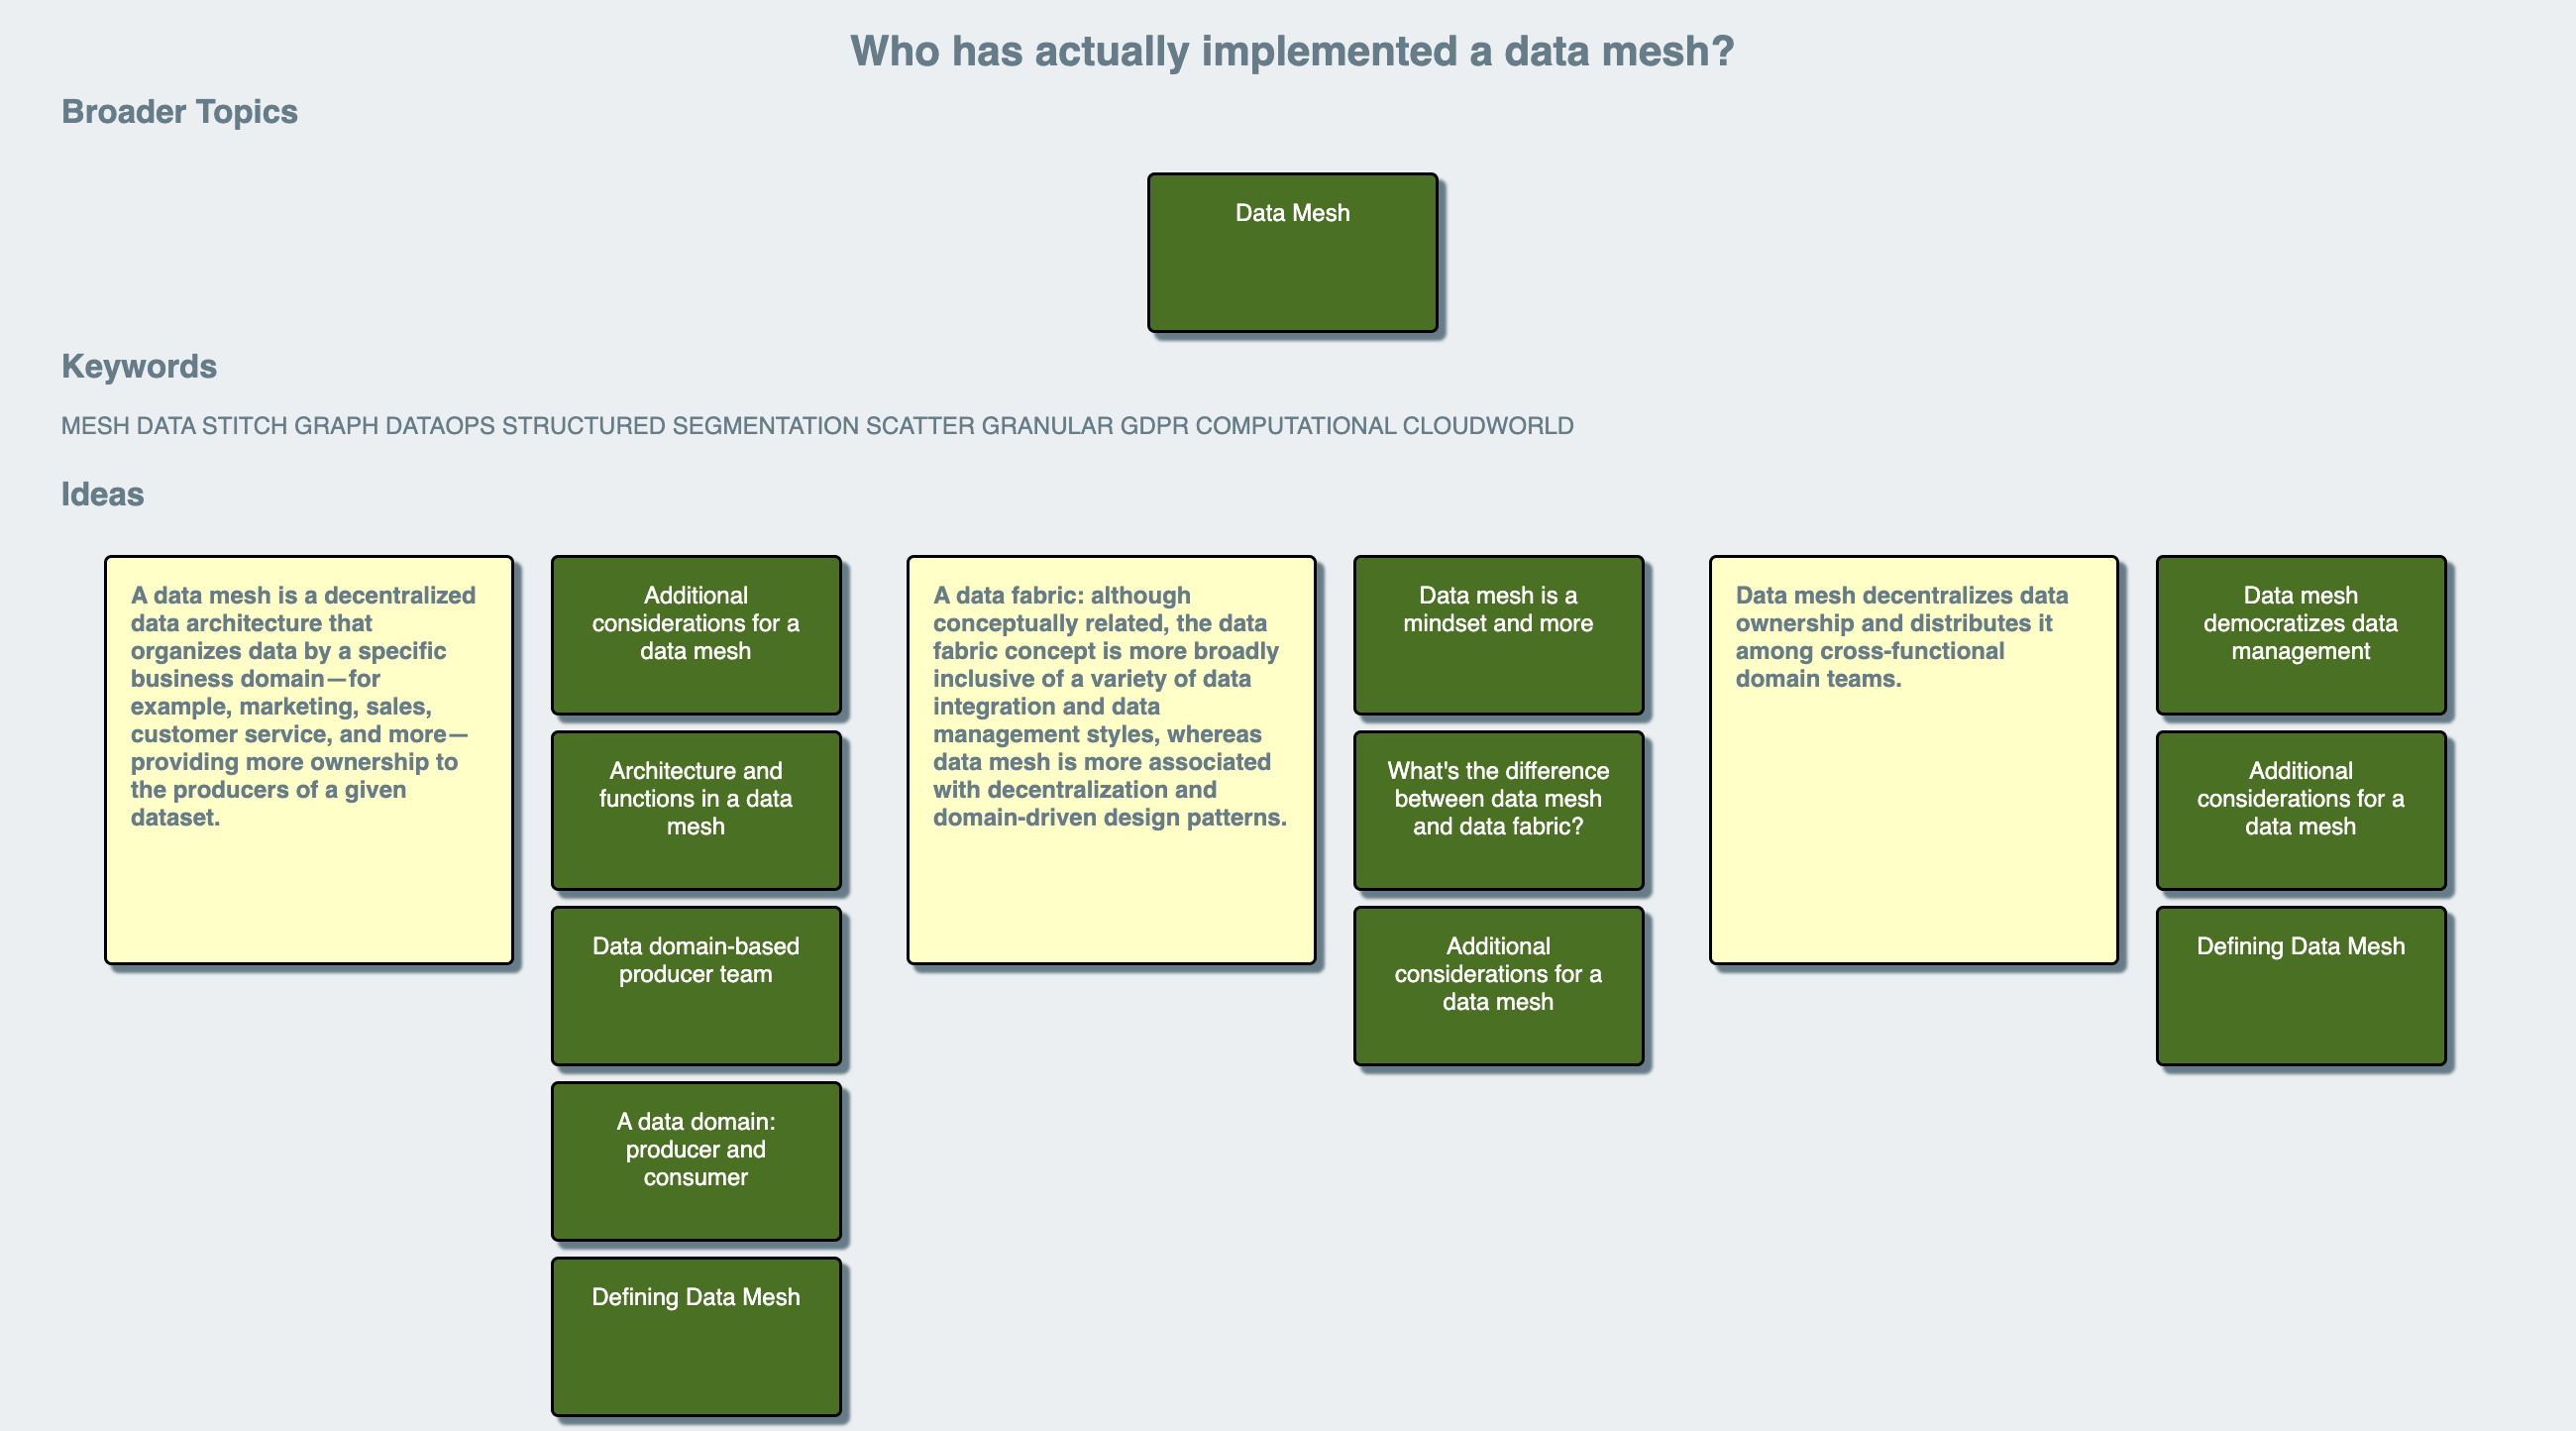 Topic: Who has actually implemented a data mesh?